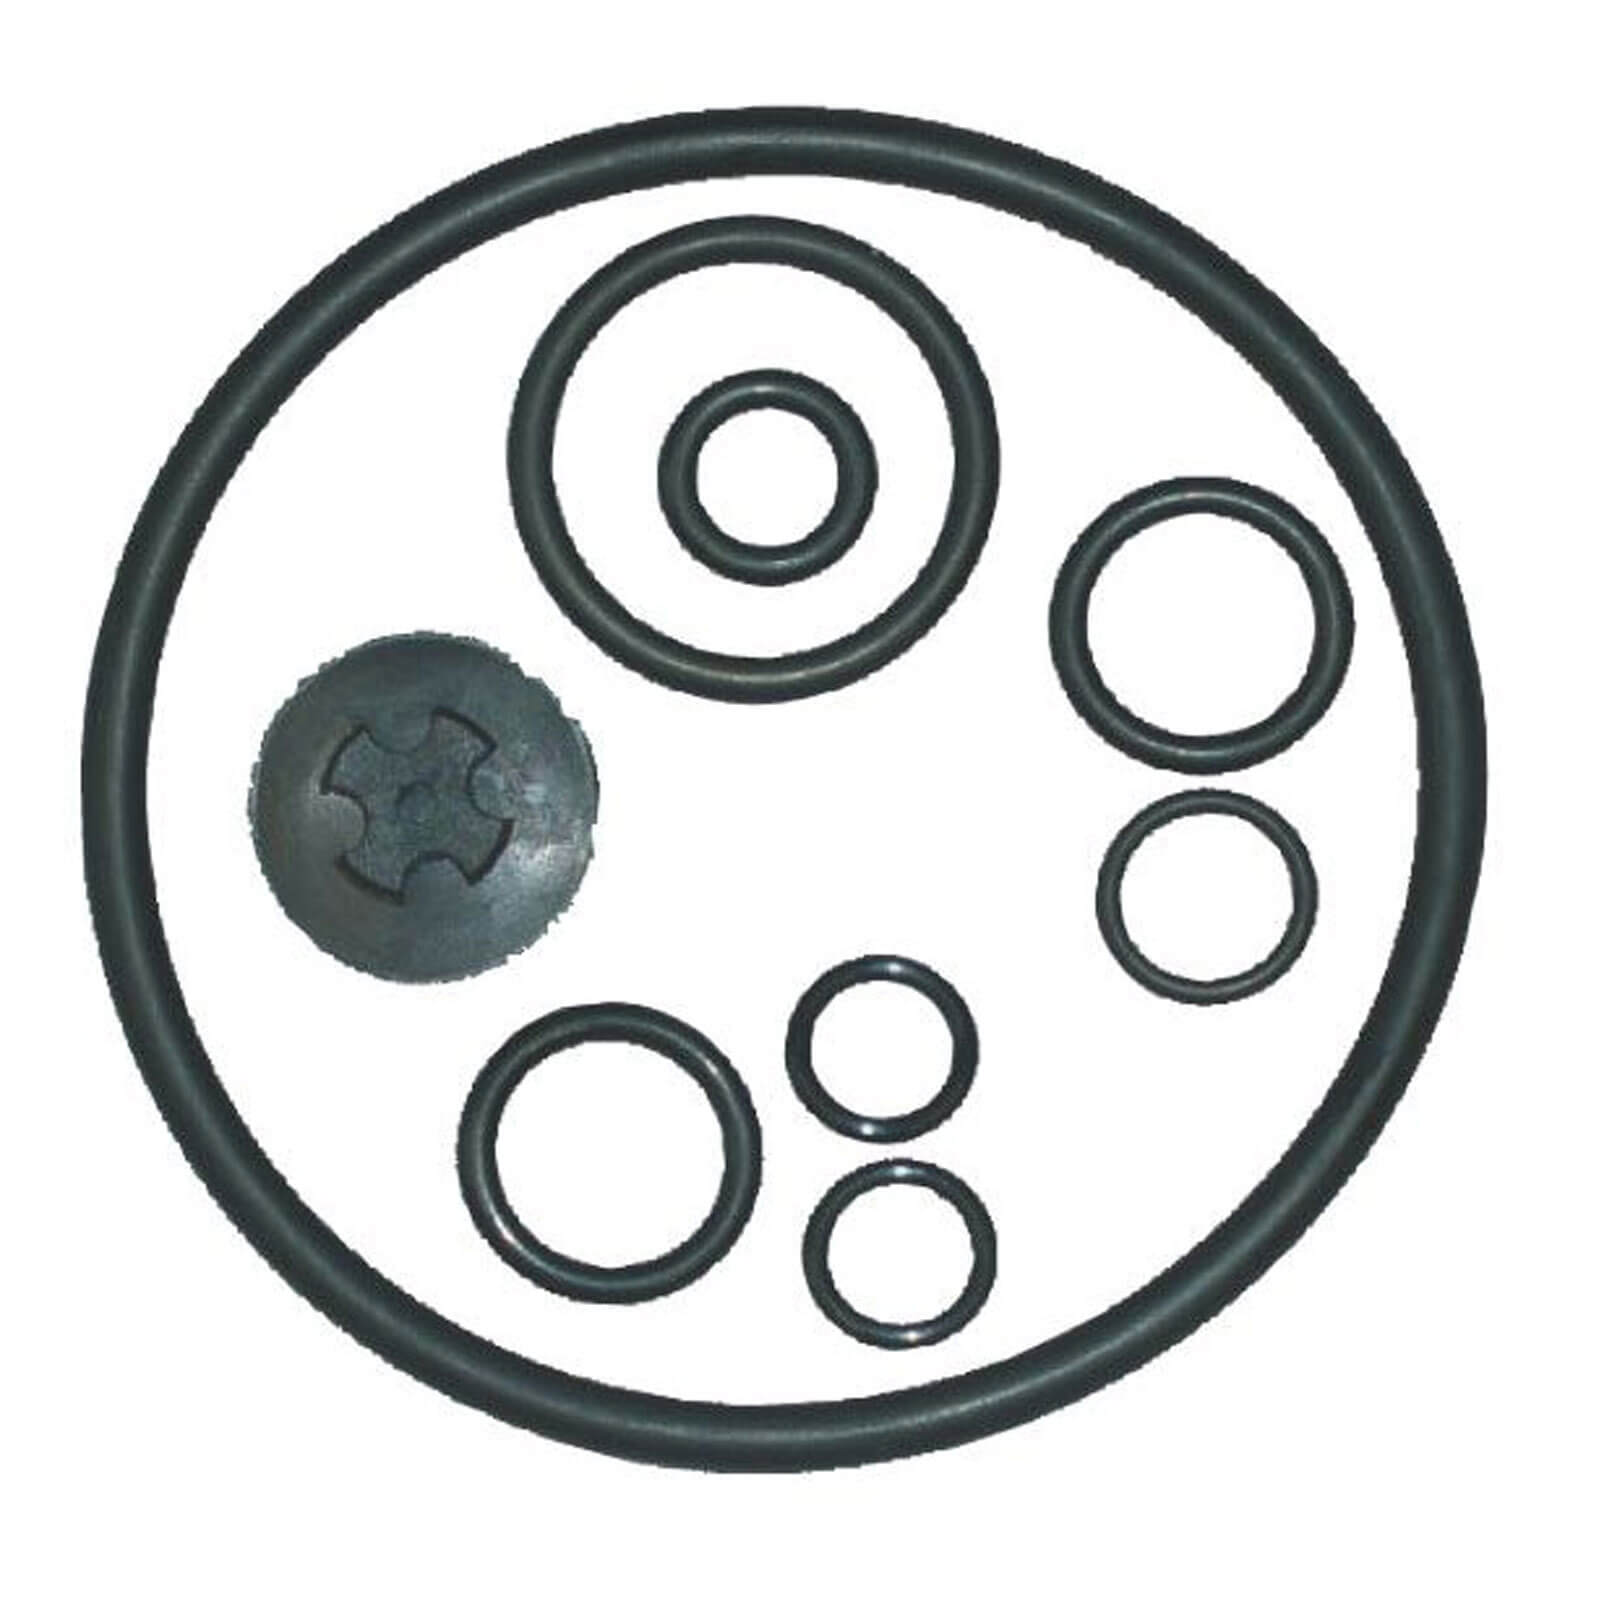 Image of Solo Gasket Kit for 461-02, 462, 463 Pressure Sprayers